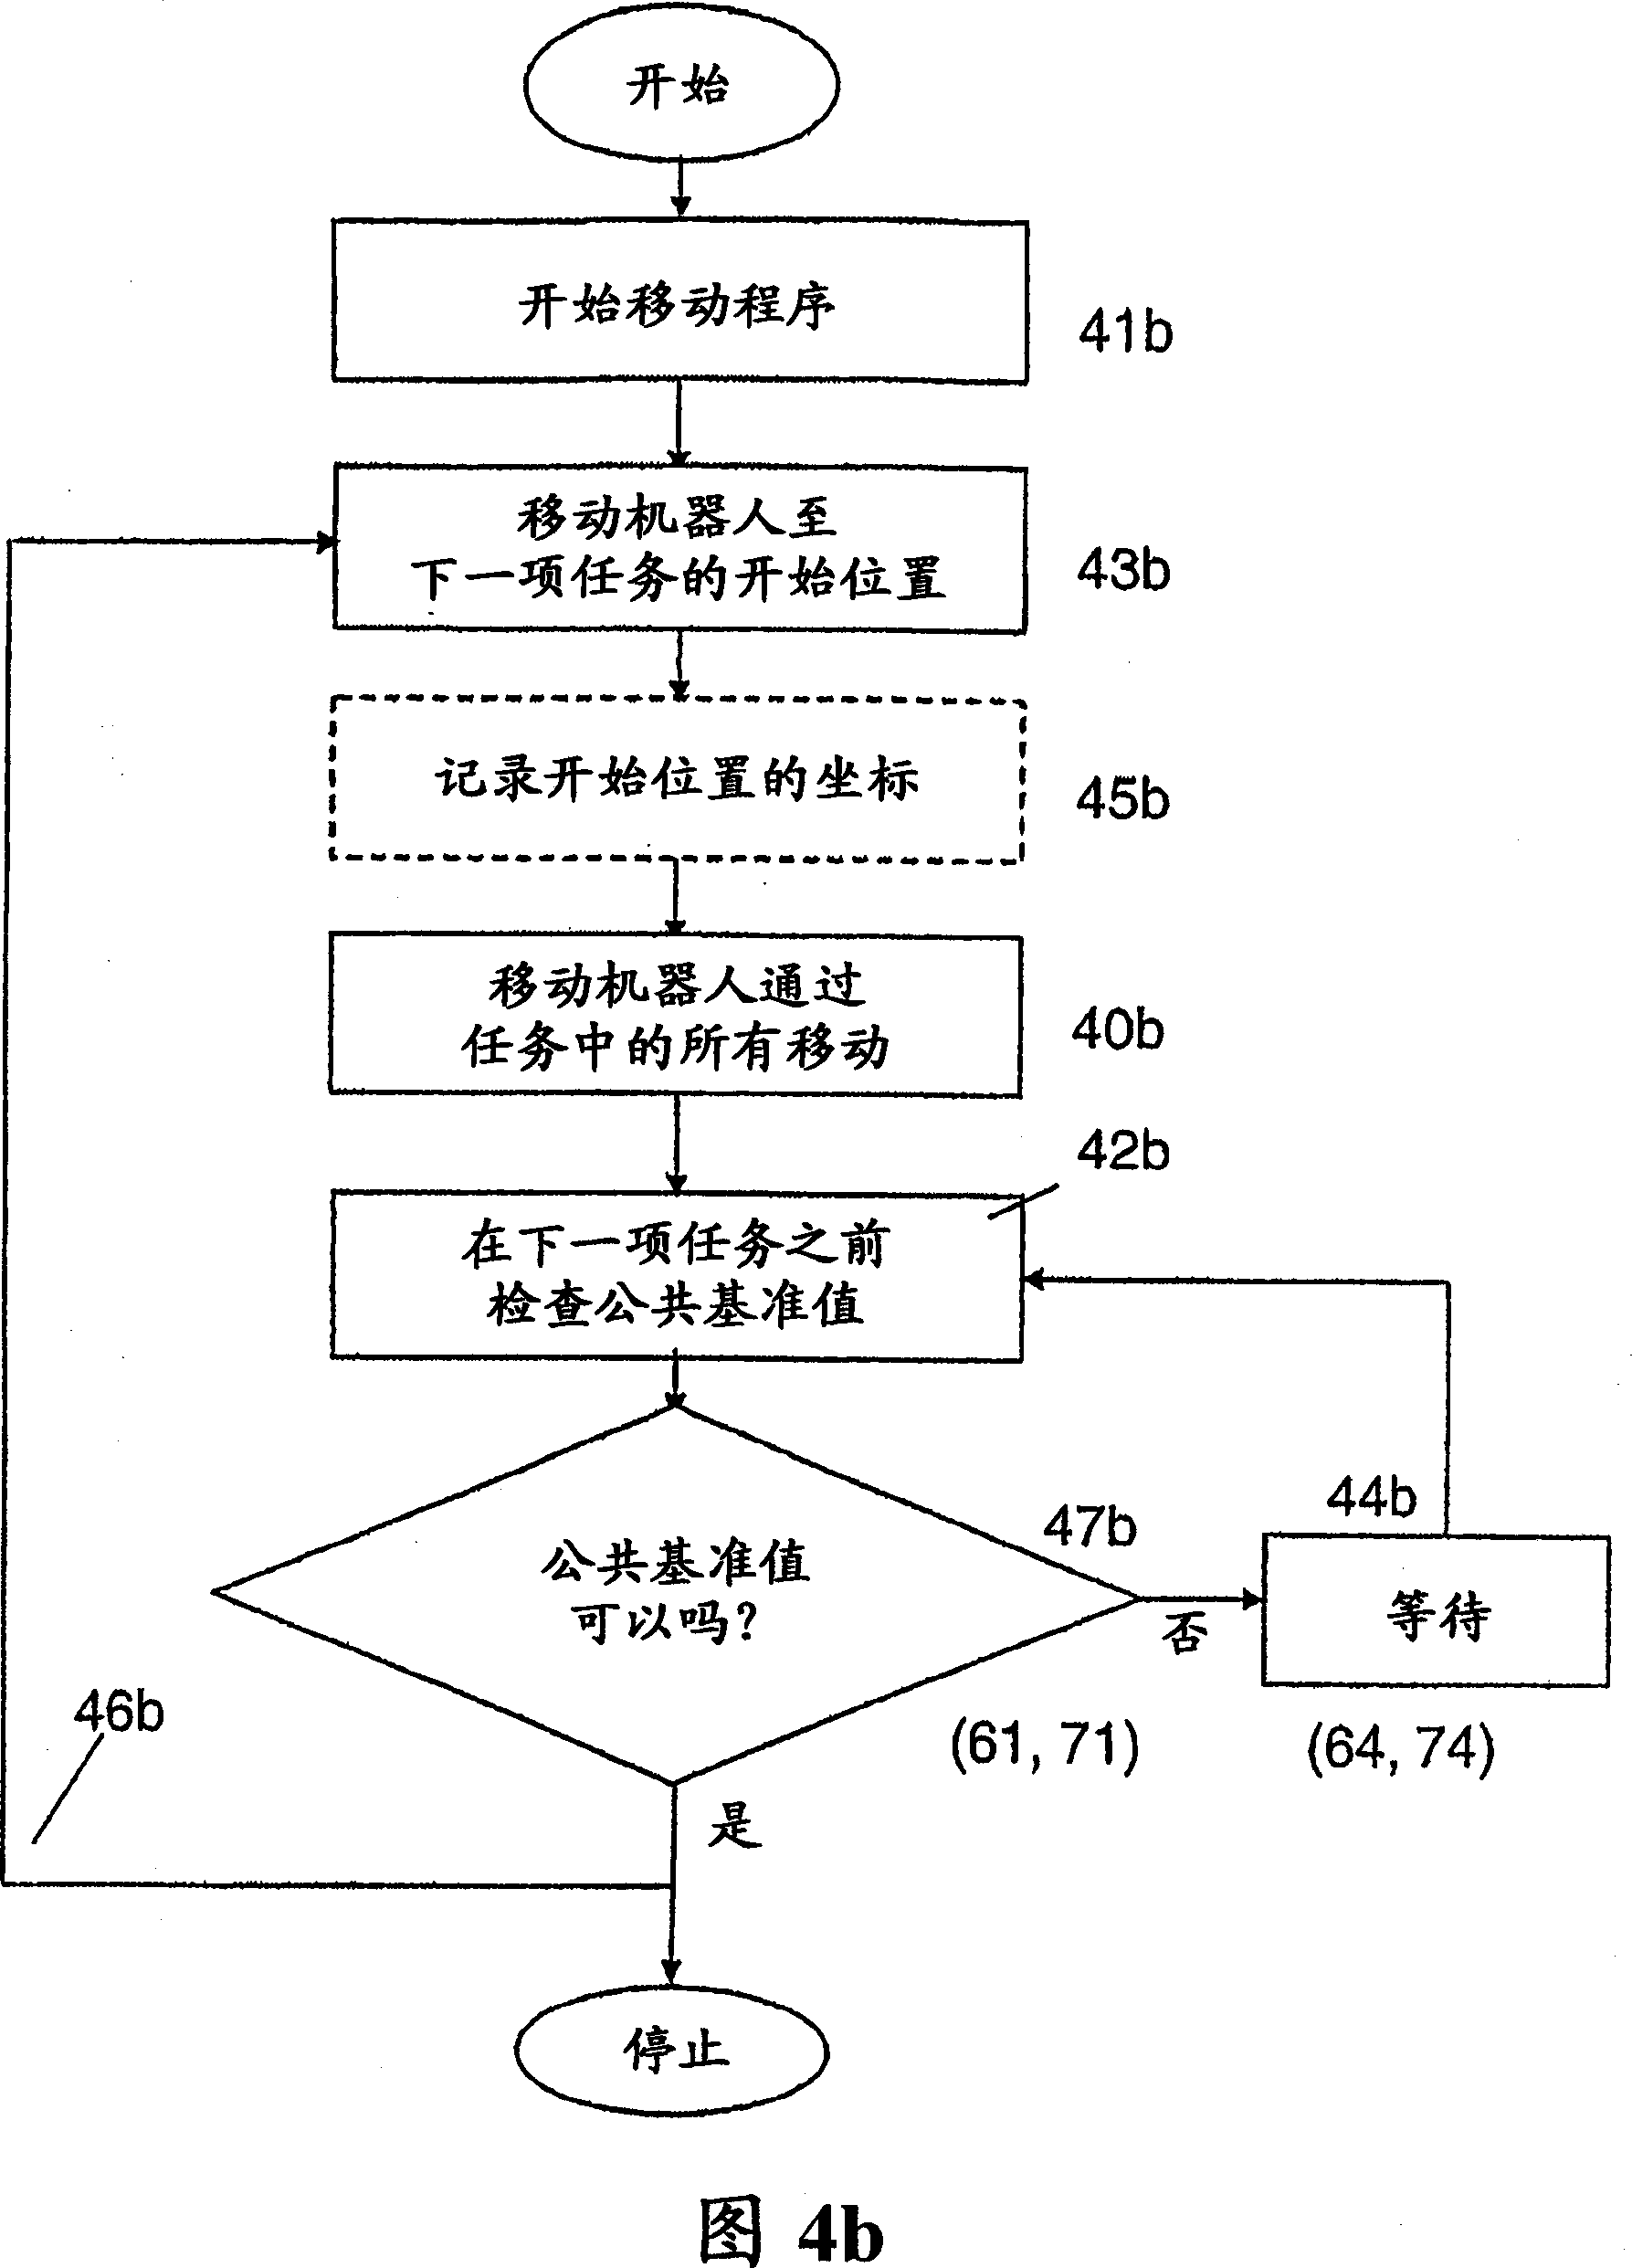 Control method, device and system for robot applications